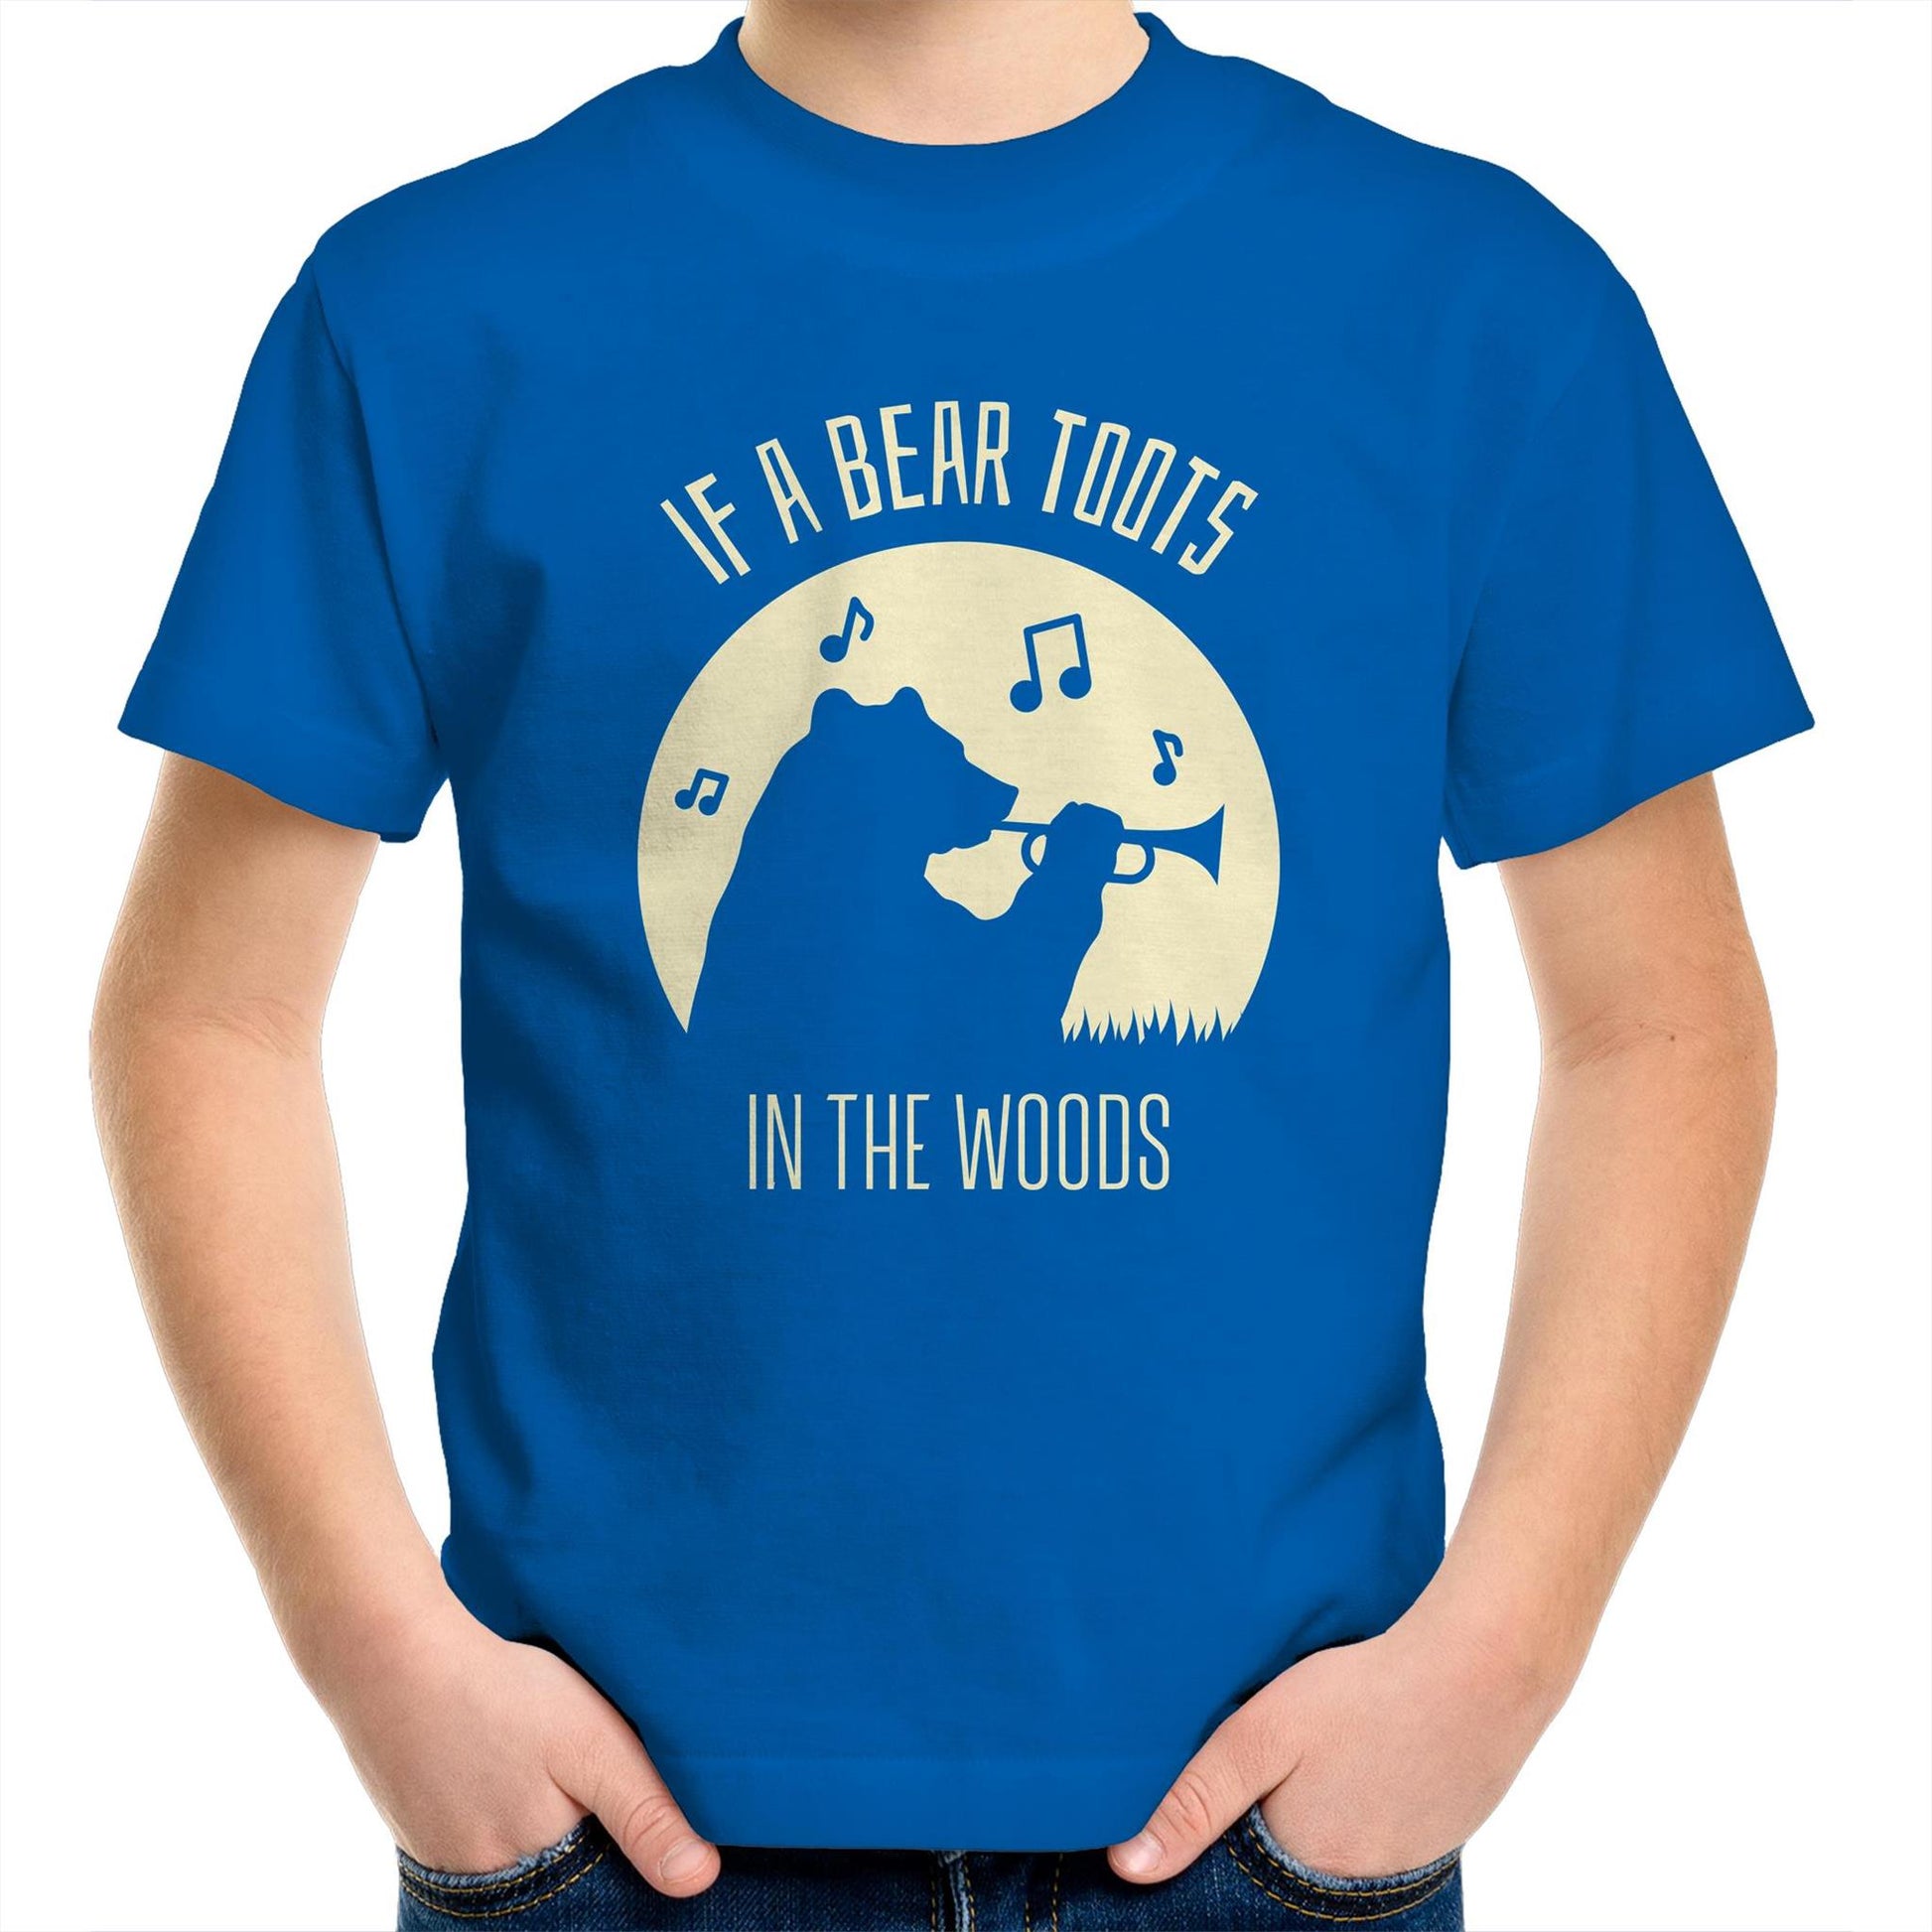 If A Bear Toots In The Woods, Trumpet Player - Kids Youth T-Shirt Bright Royal Kids Youth T-shirt animal Music